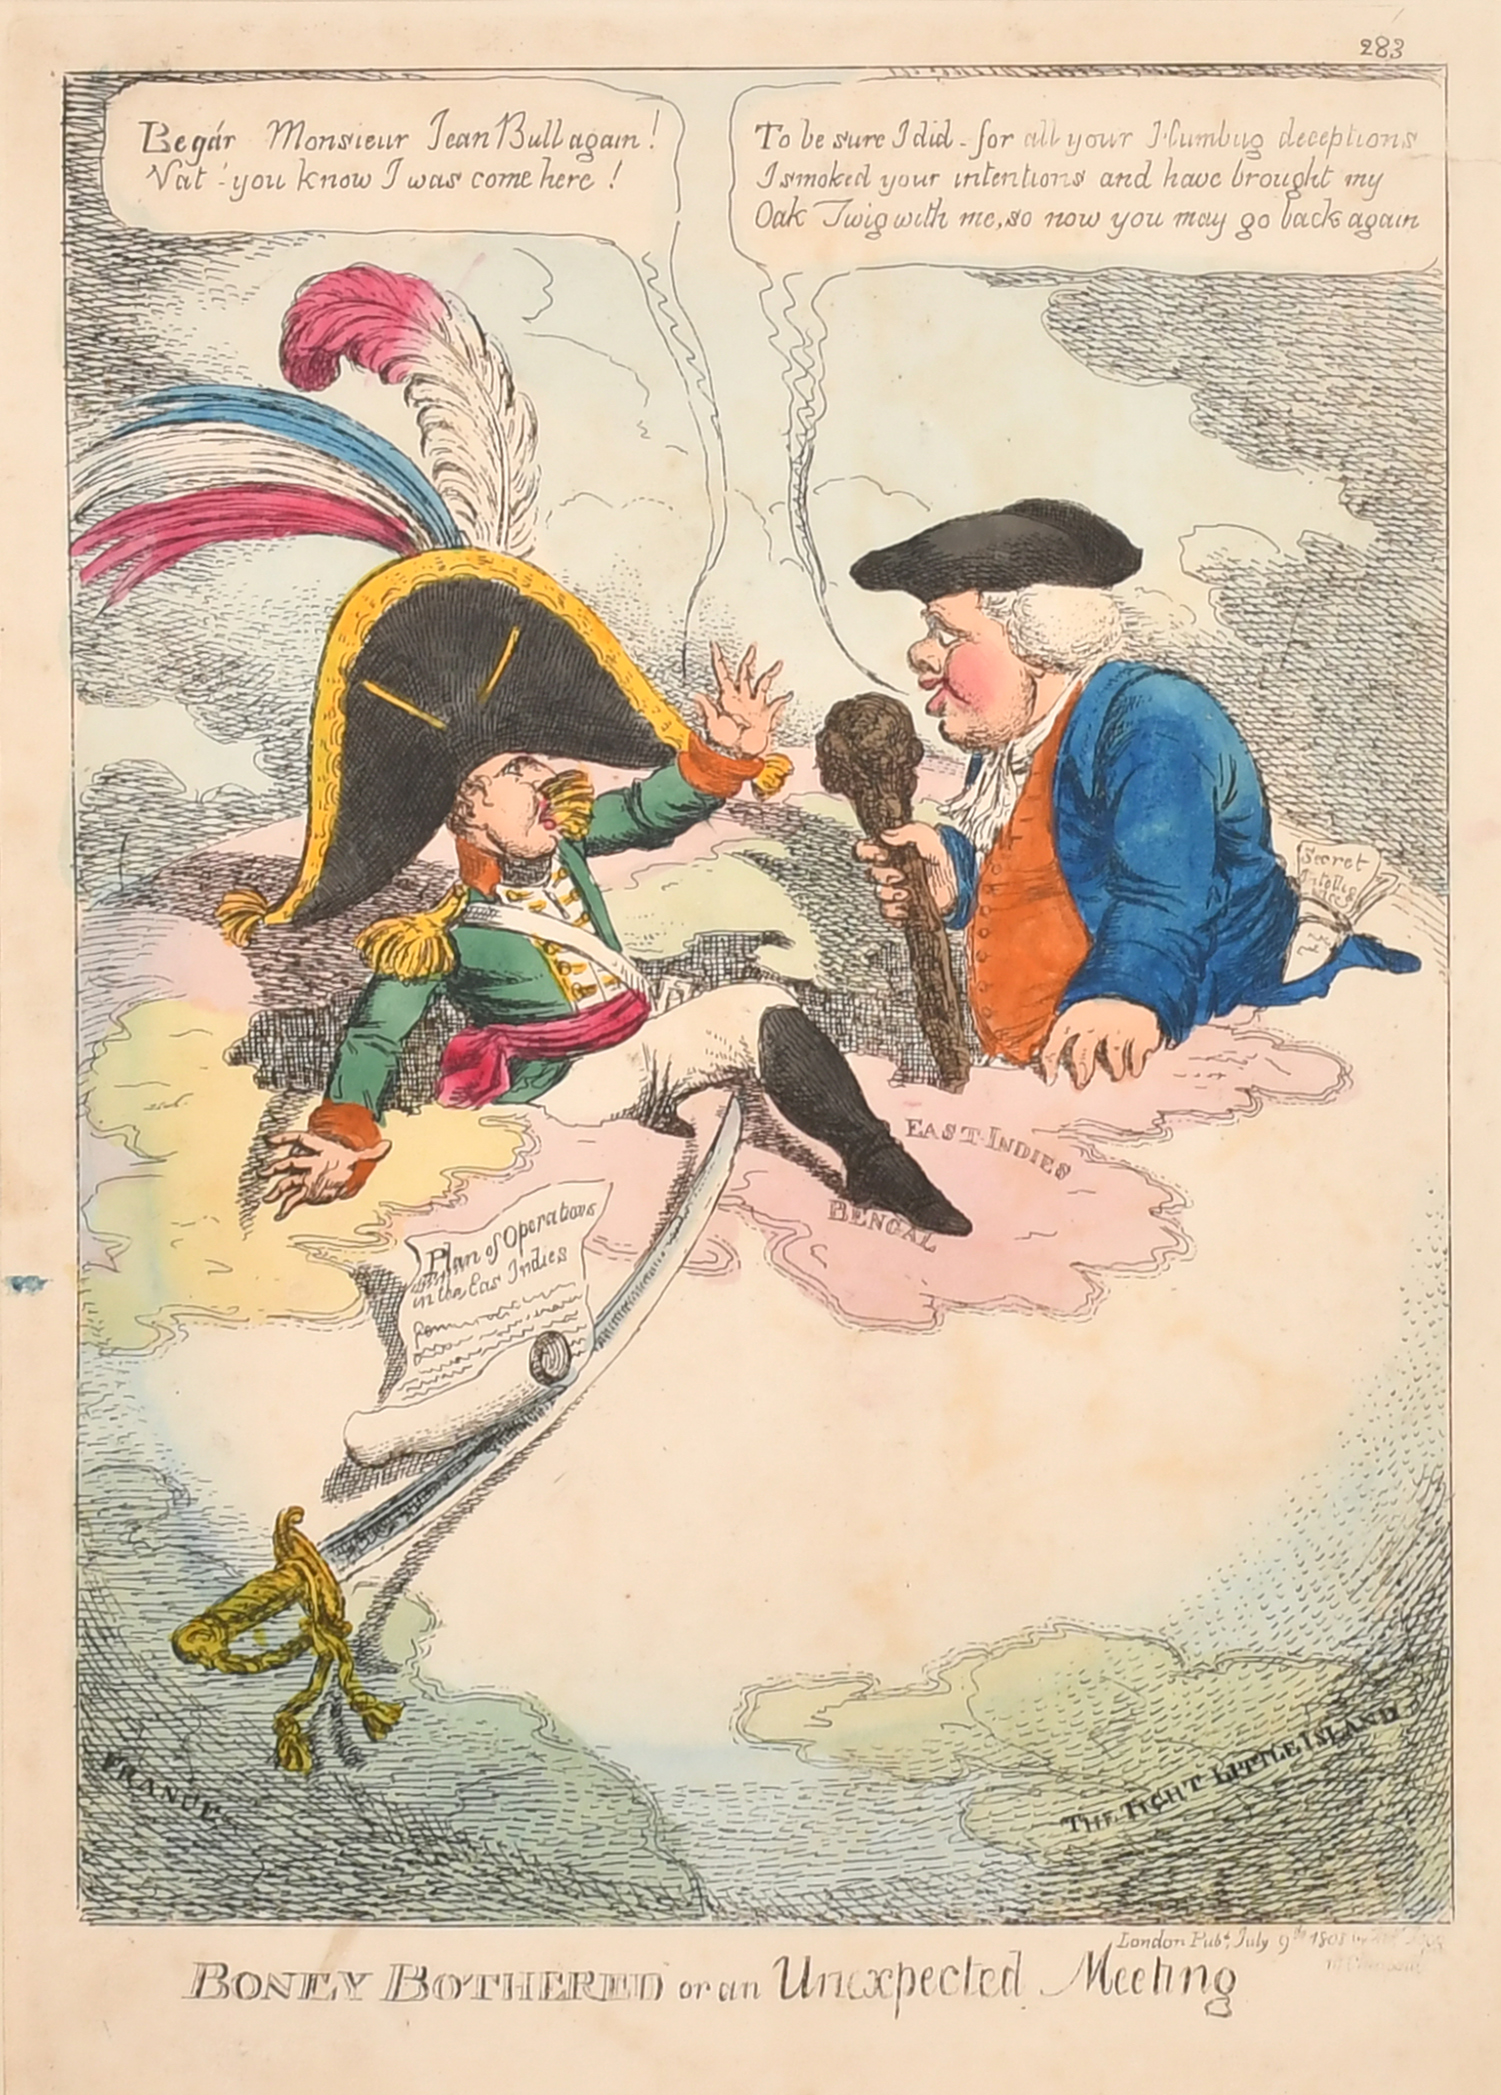 Charles Williams (act.1787-1830) British. "Boney Bothered or An Unexpected Meeting", Hand coloured